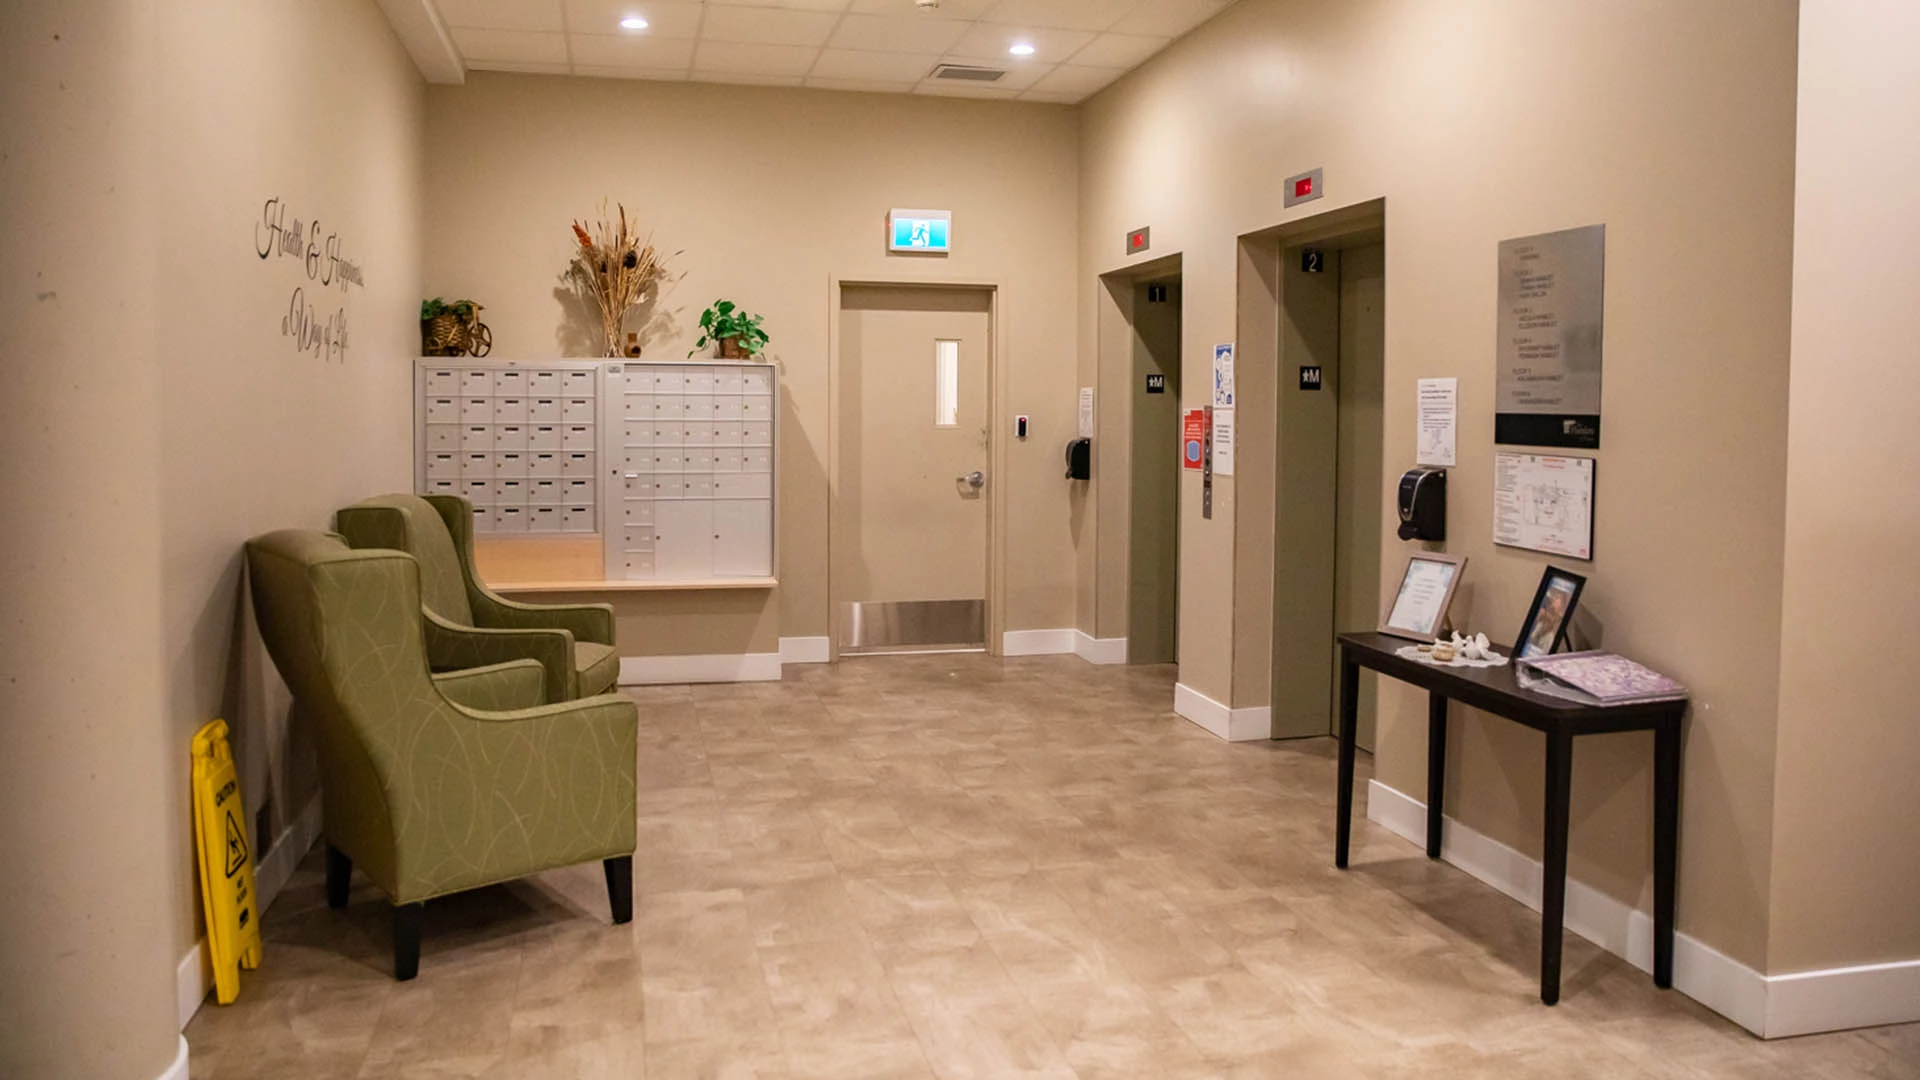 Sitting amenities are provided in corridors with elevators